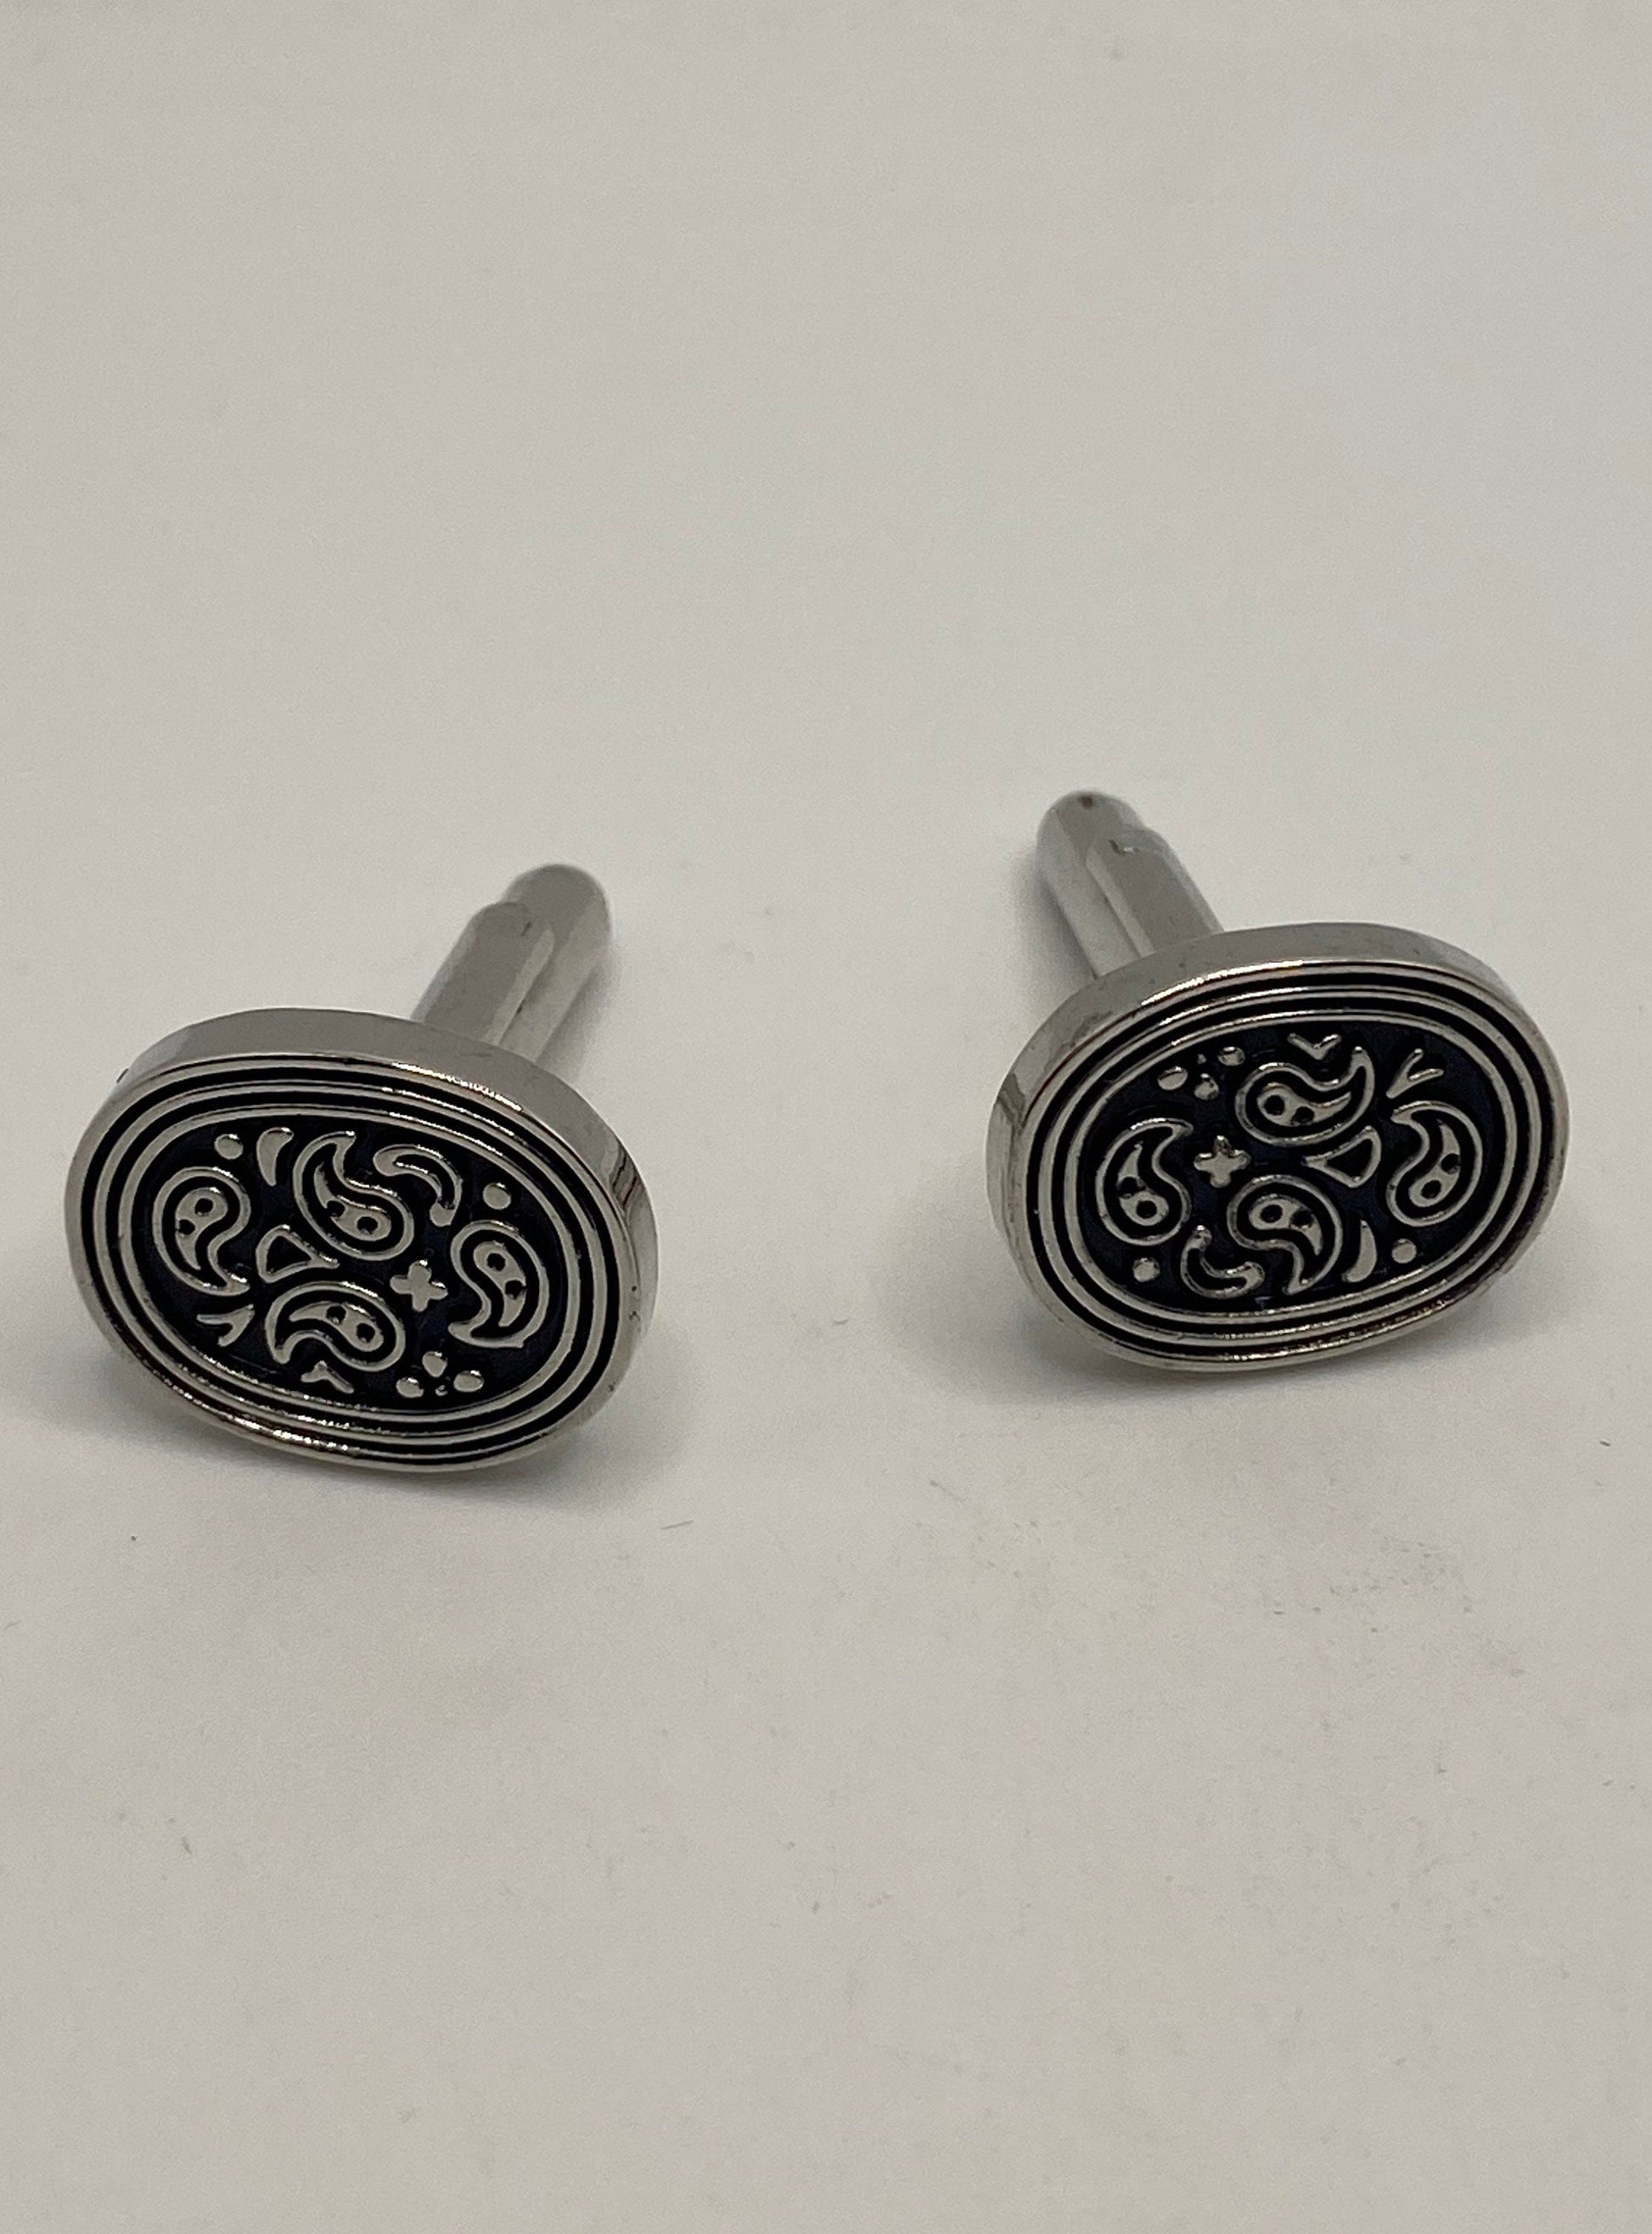 Vintage Cuff Links 925 Sterling Silver